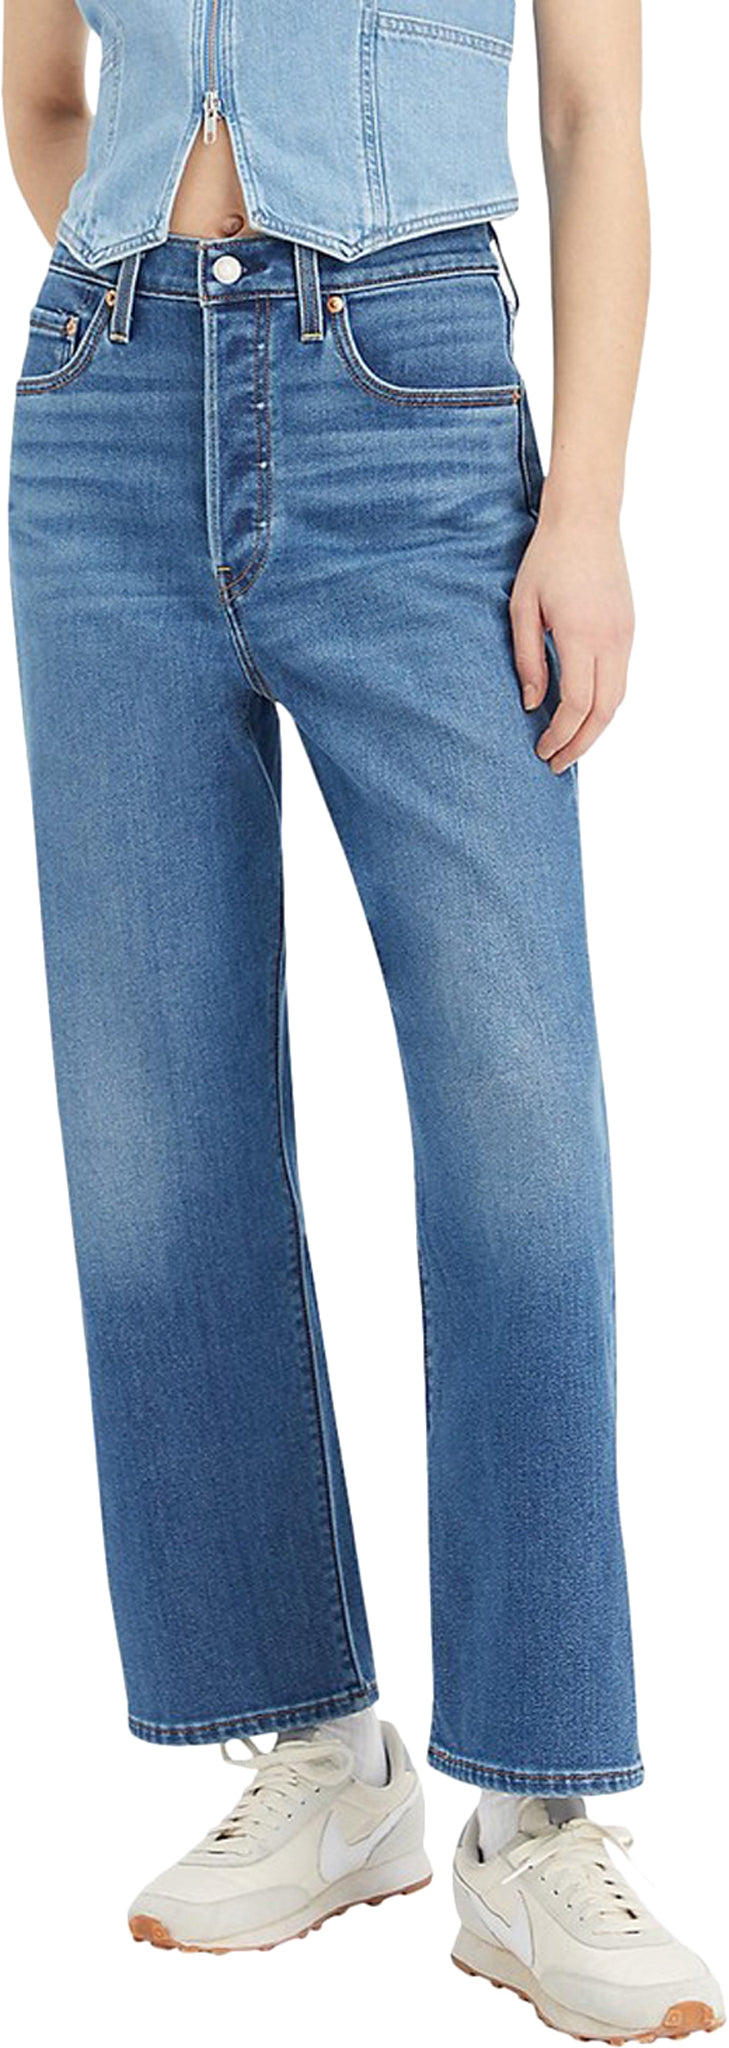 Ribcage Straight Ankle Jeans - Hitzig Mid